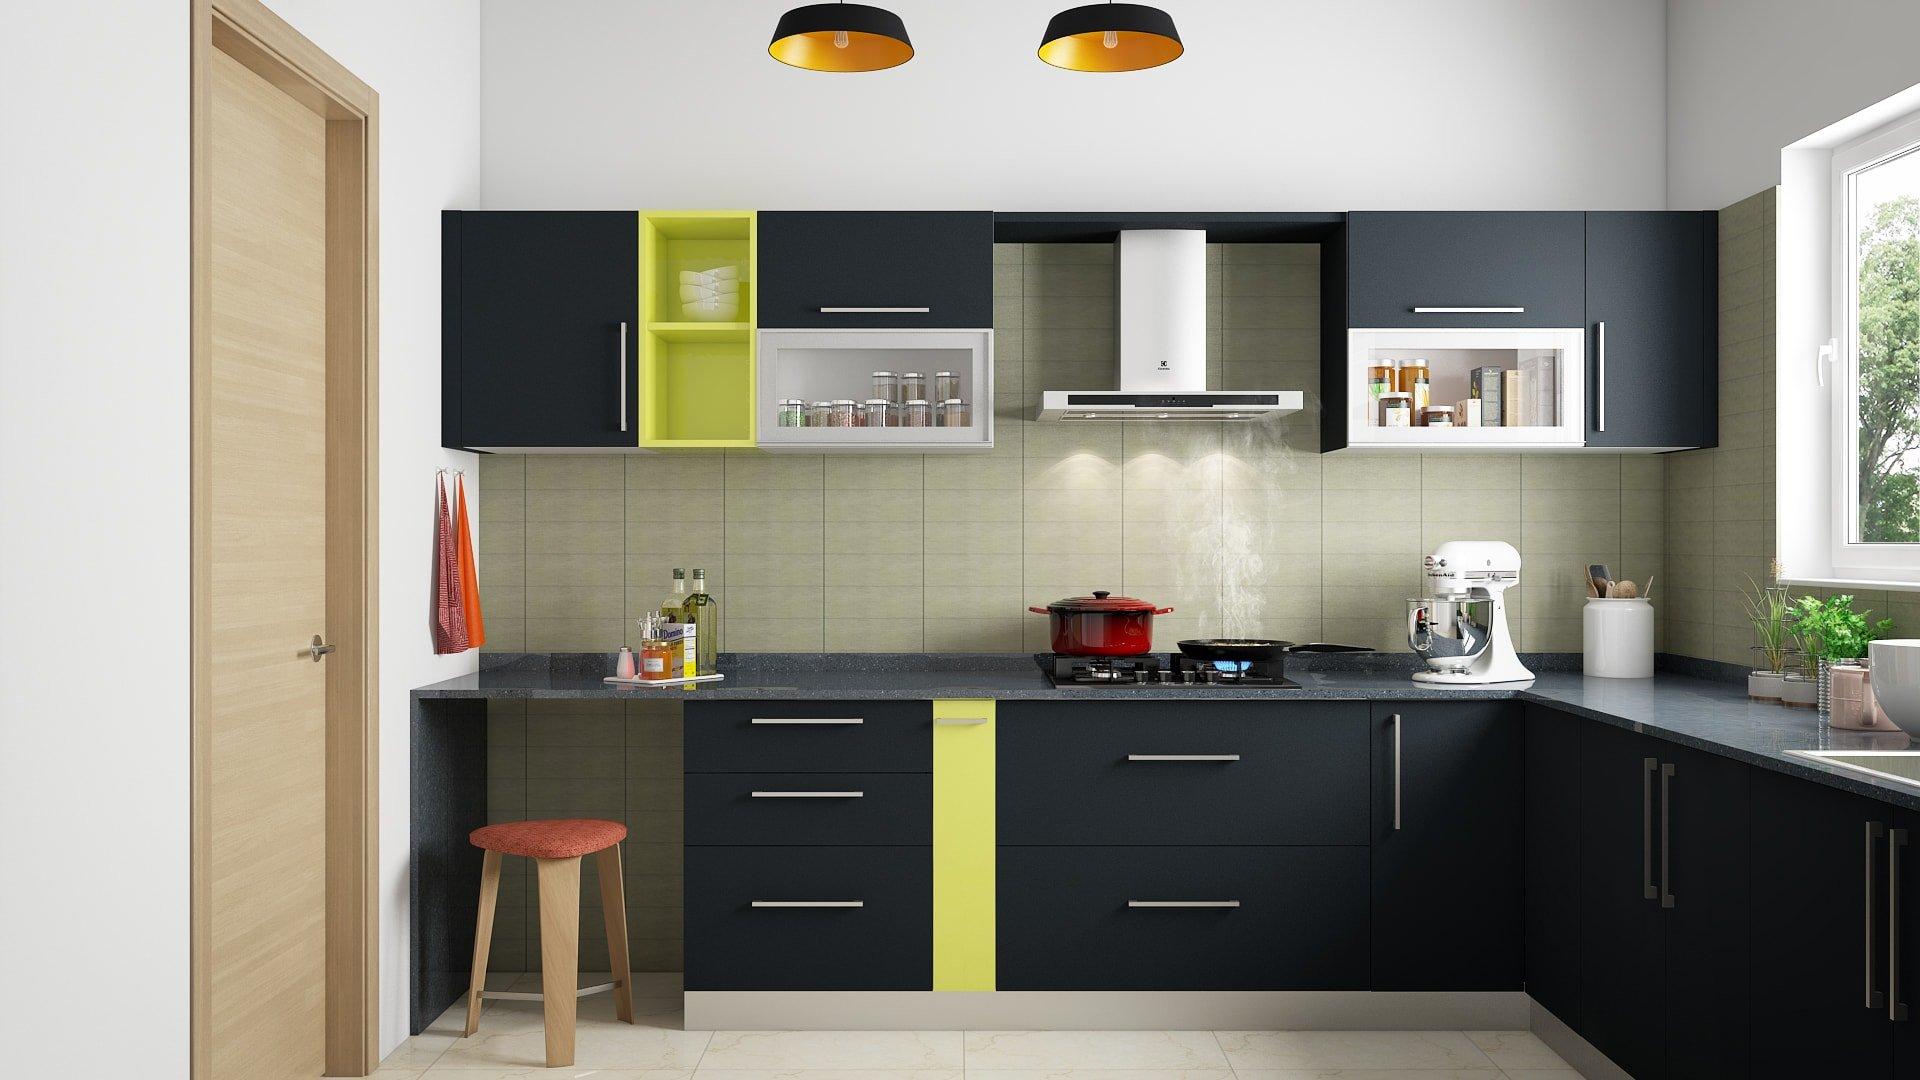 What to Consider When Designing an L-Shaped Modular Kitchen